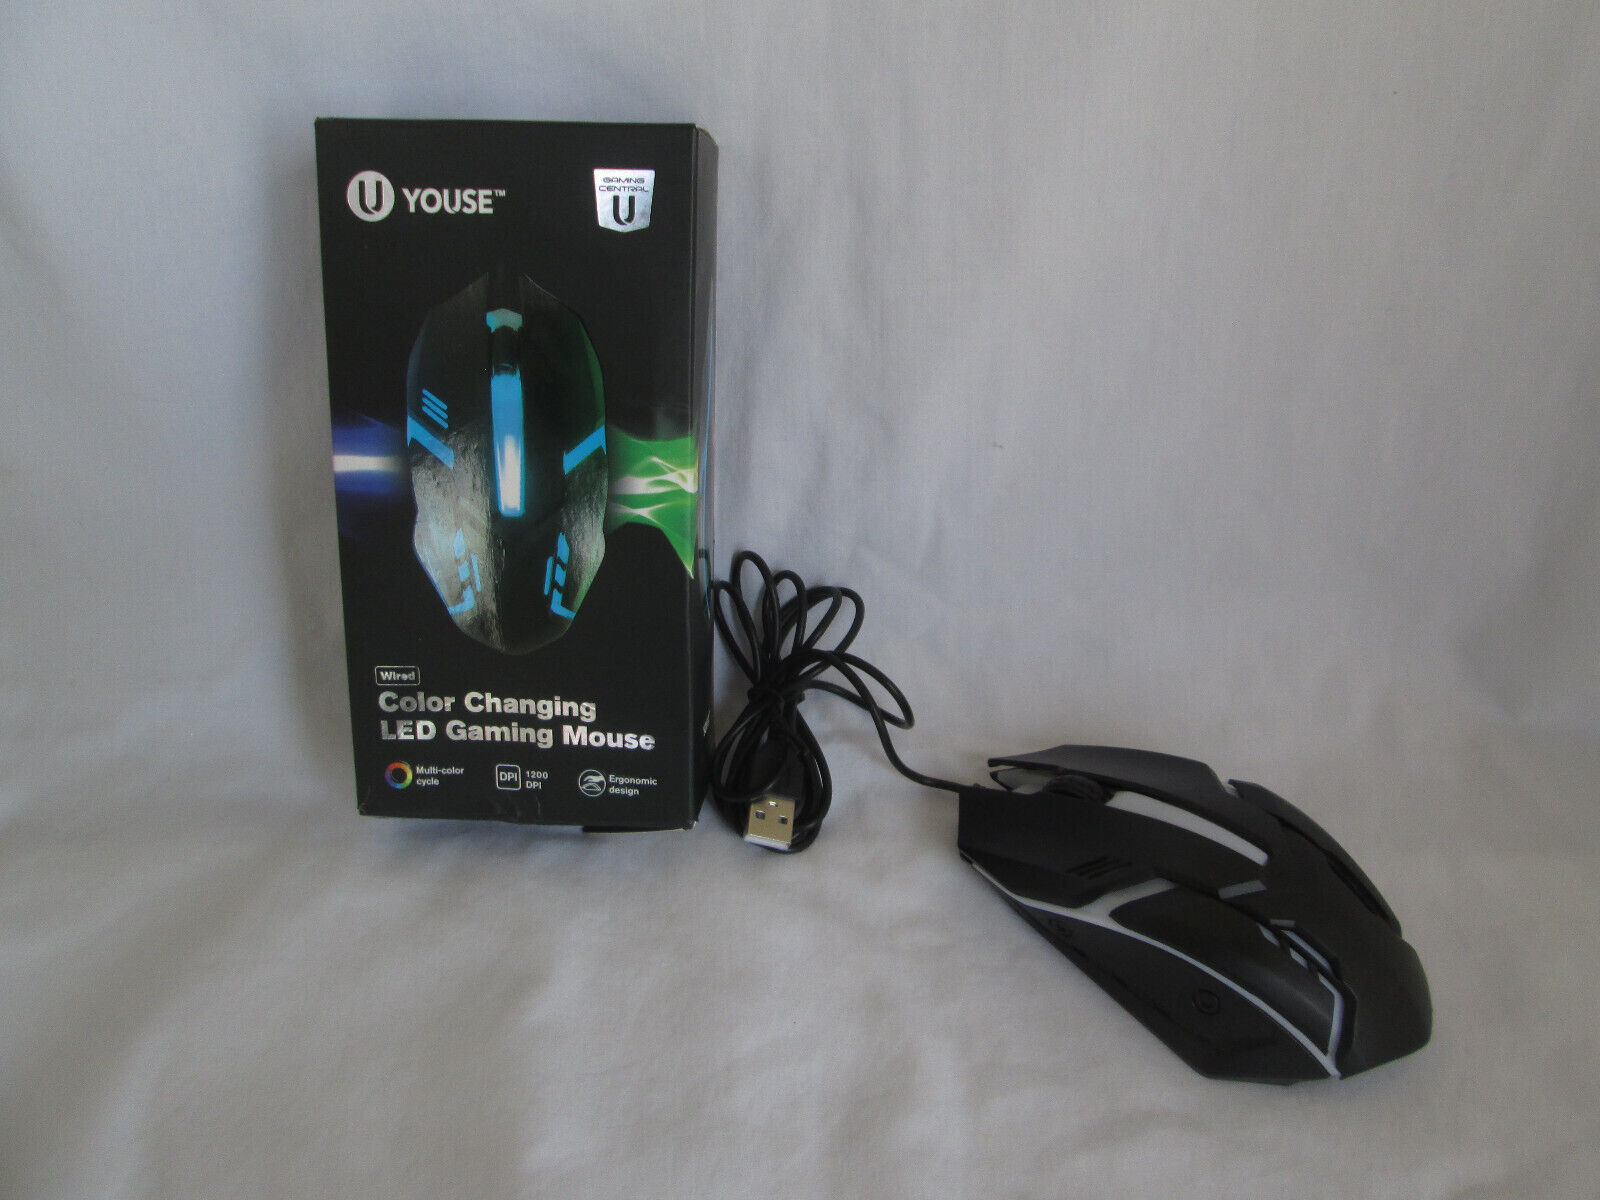 U YOUSE Wired  Color Changing LED Gaming  Mouse  NEW Open Box